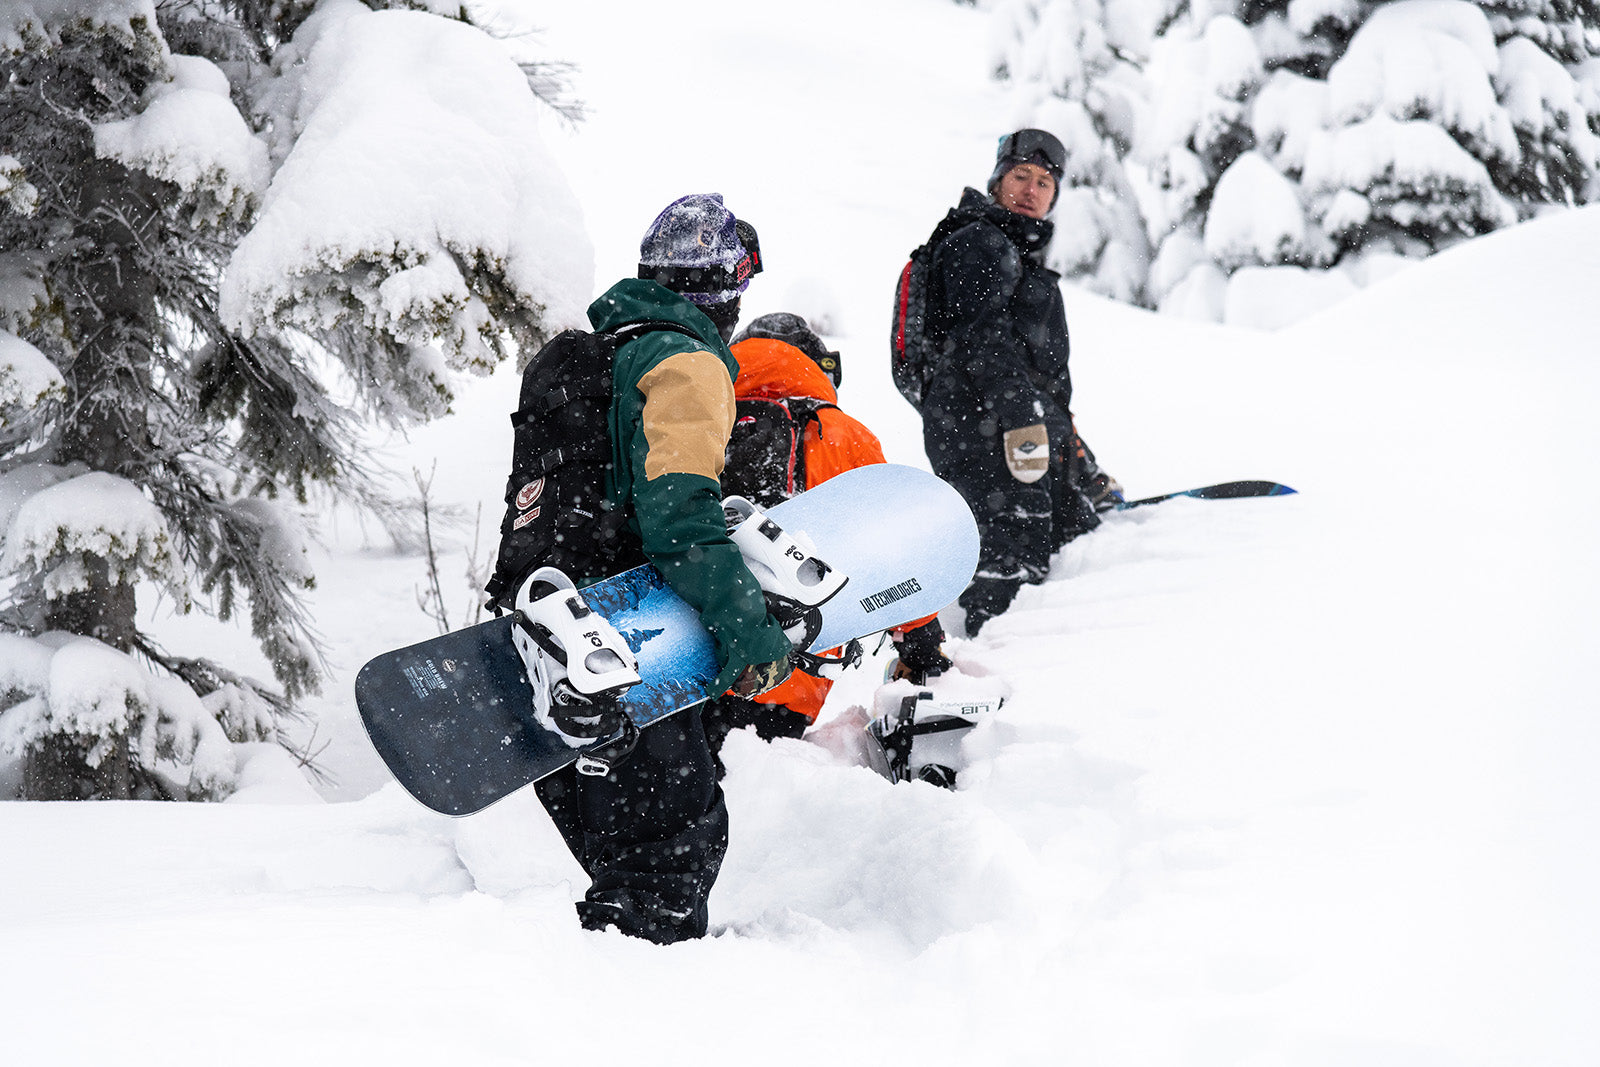 Mad Dog's Ski & Board carries loads of snowboards, in Abbotsford, BC.